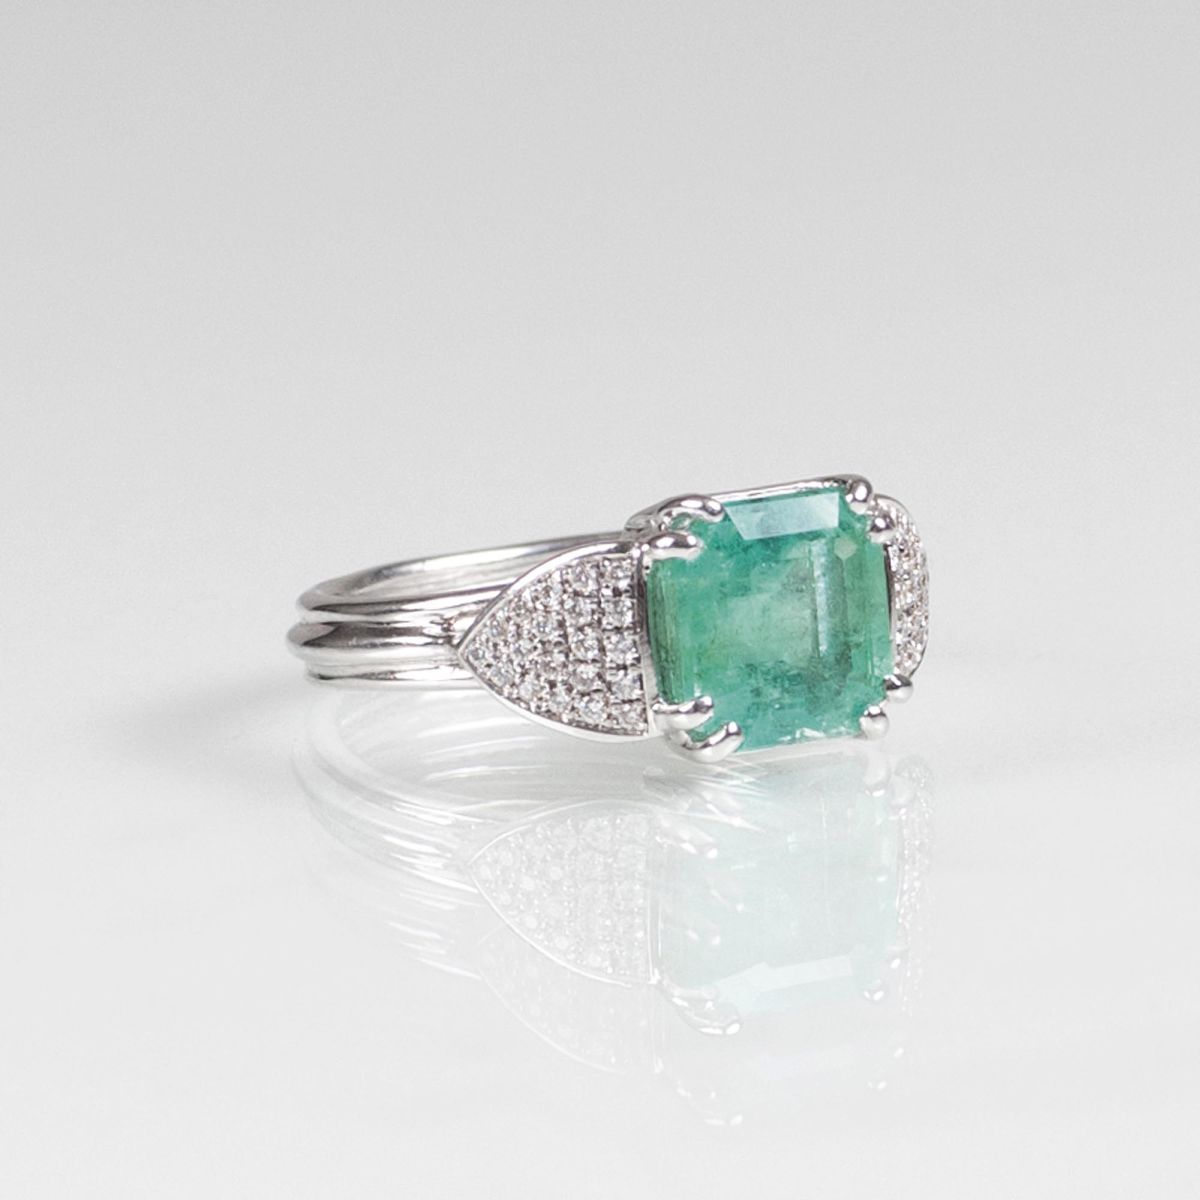 A Colombian Emerald Ring with Diamonds - image 2